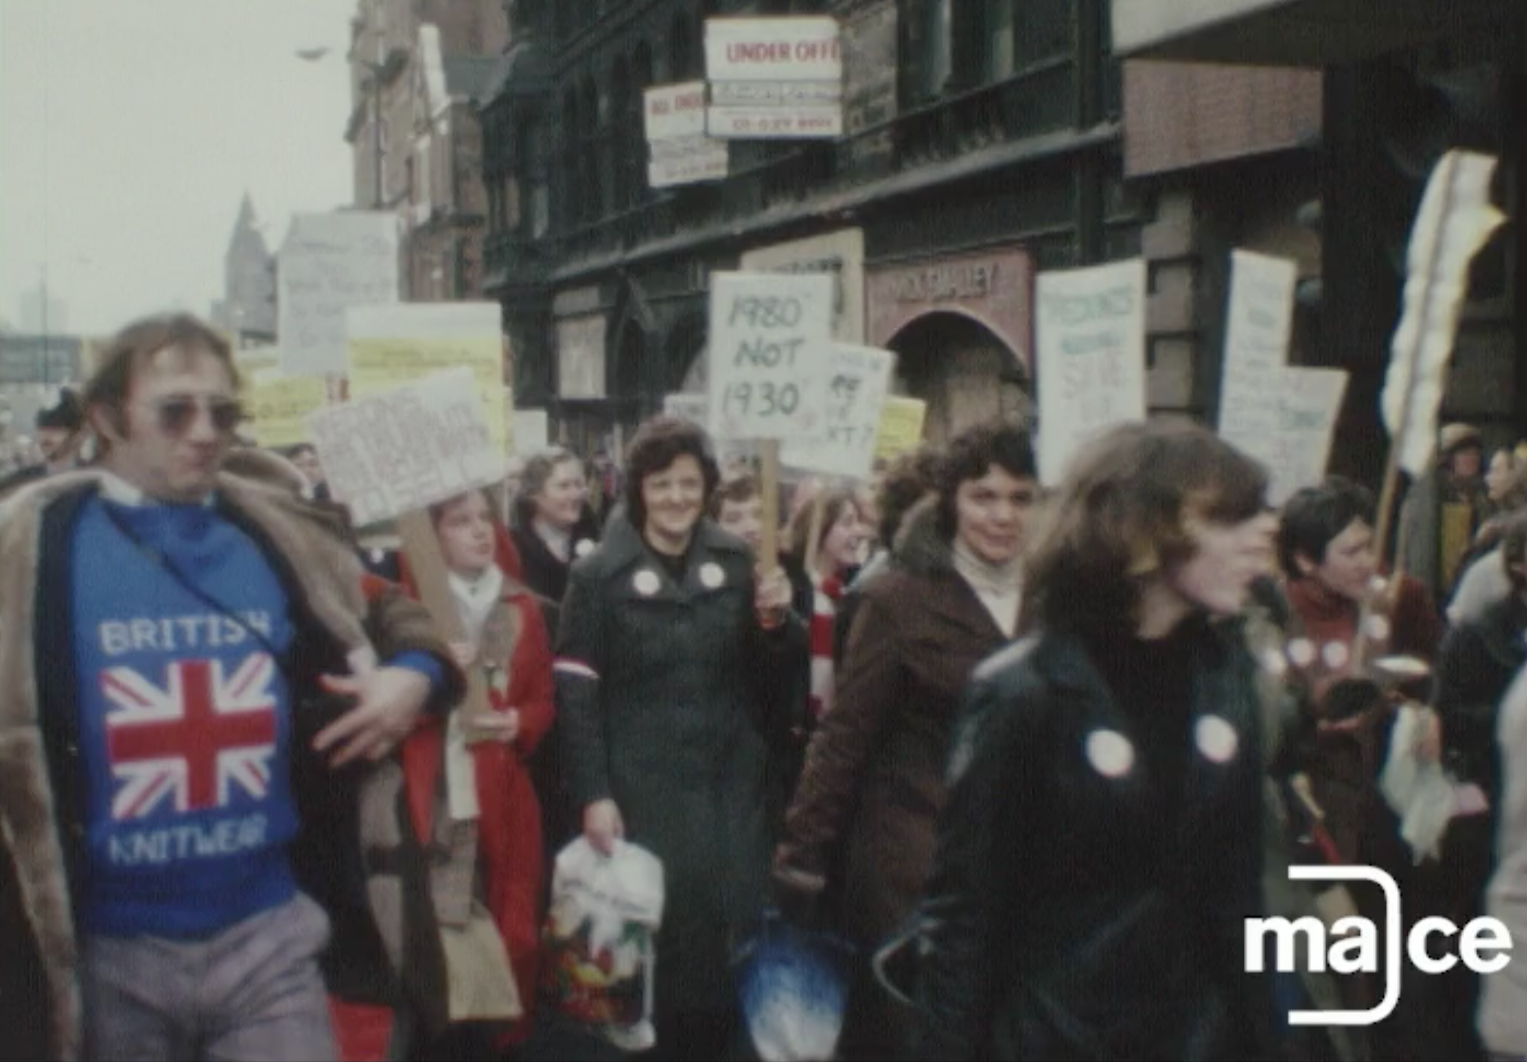 An archive film still showing a crowd of protestors walking down a city street.